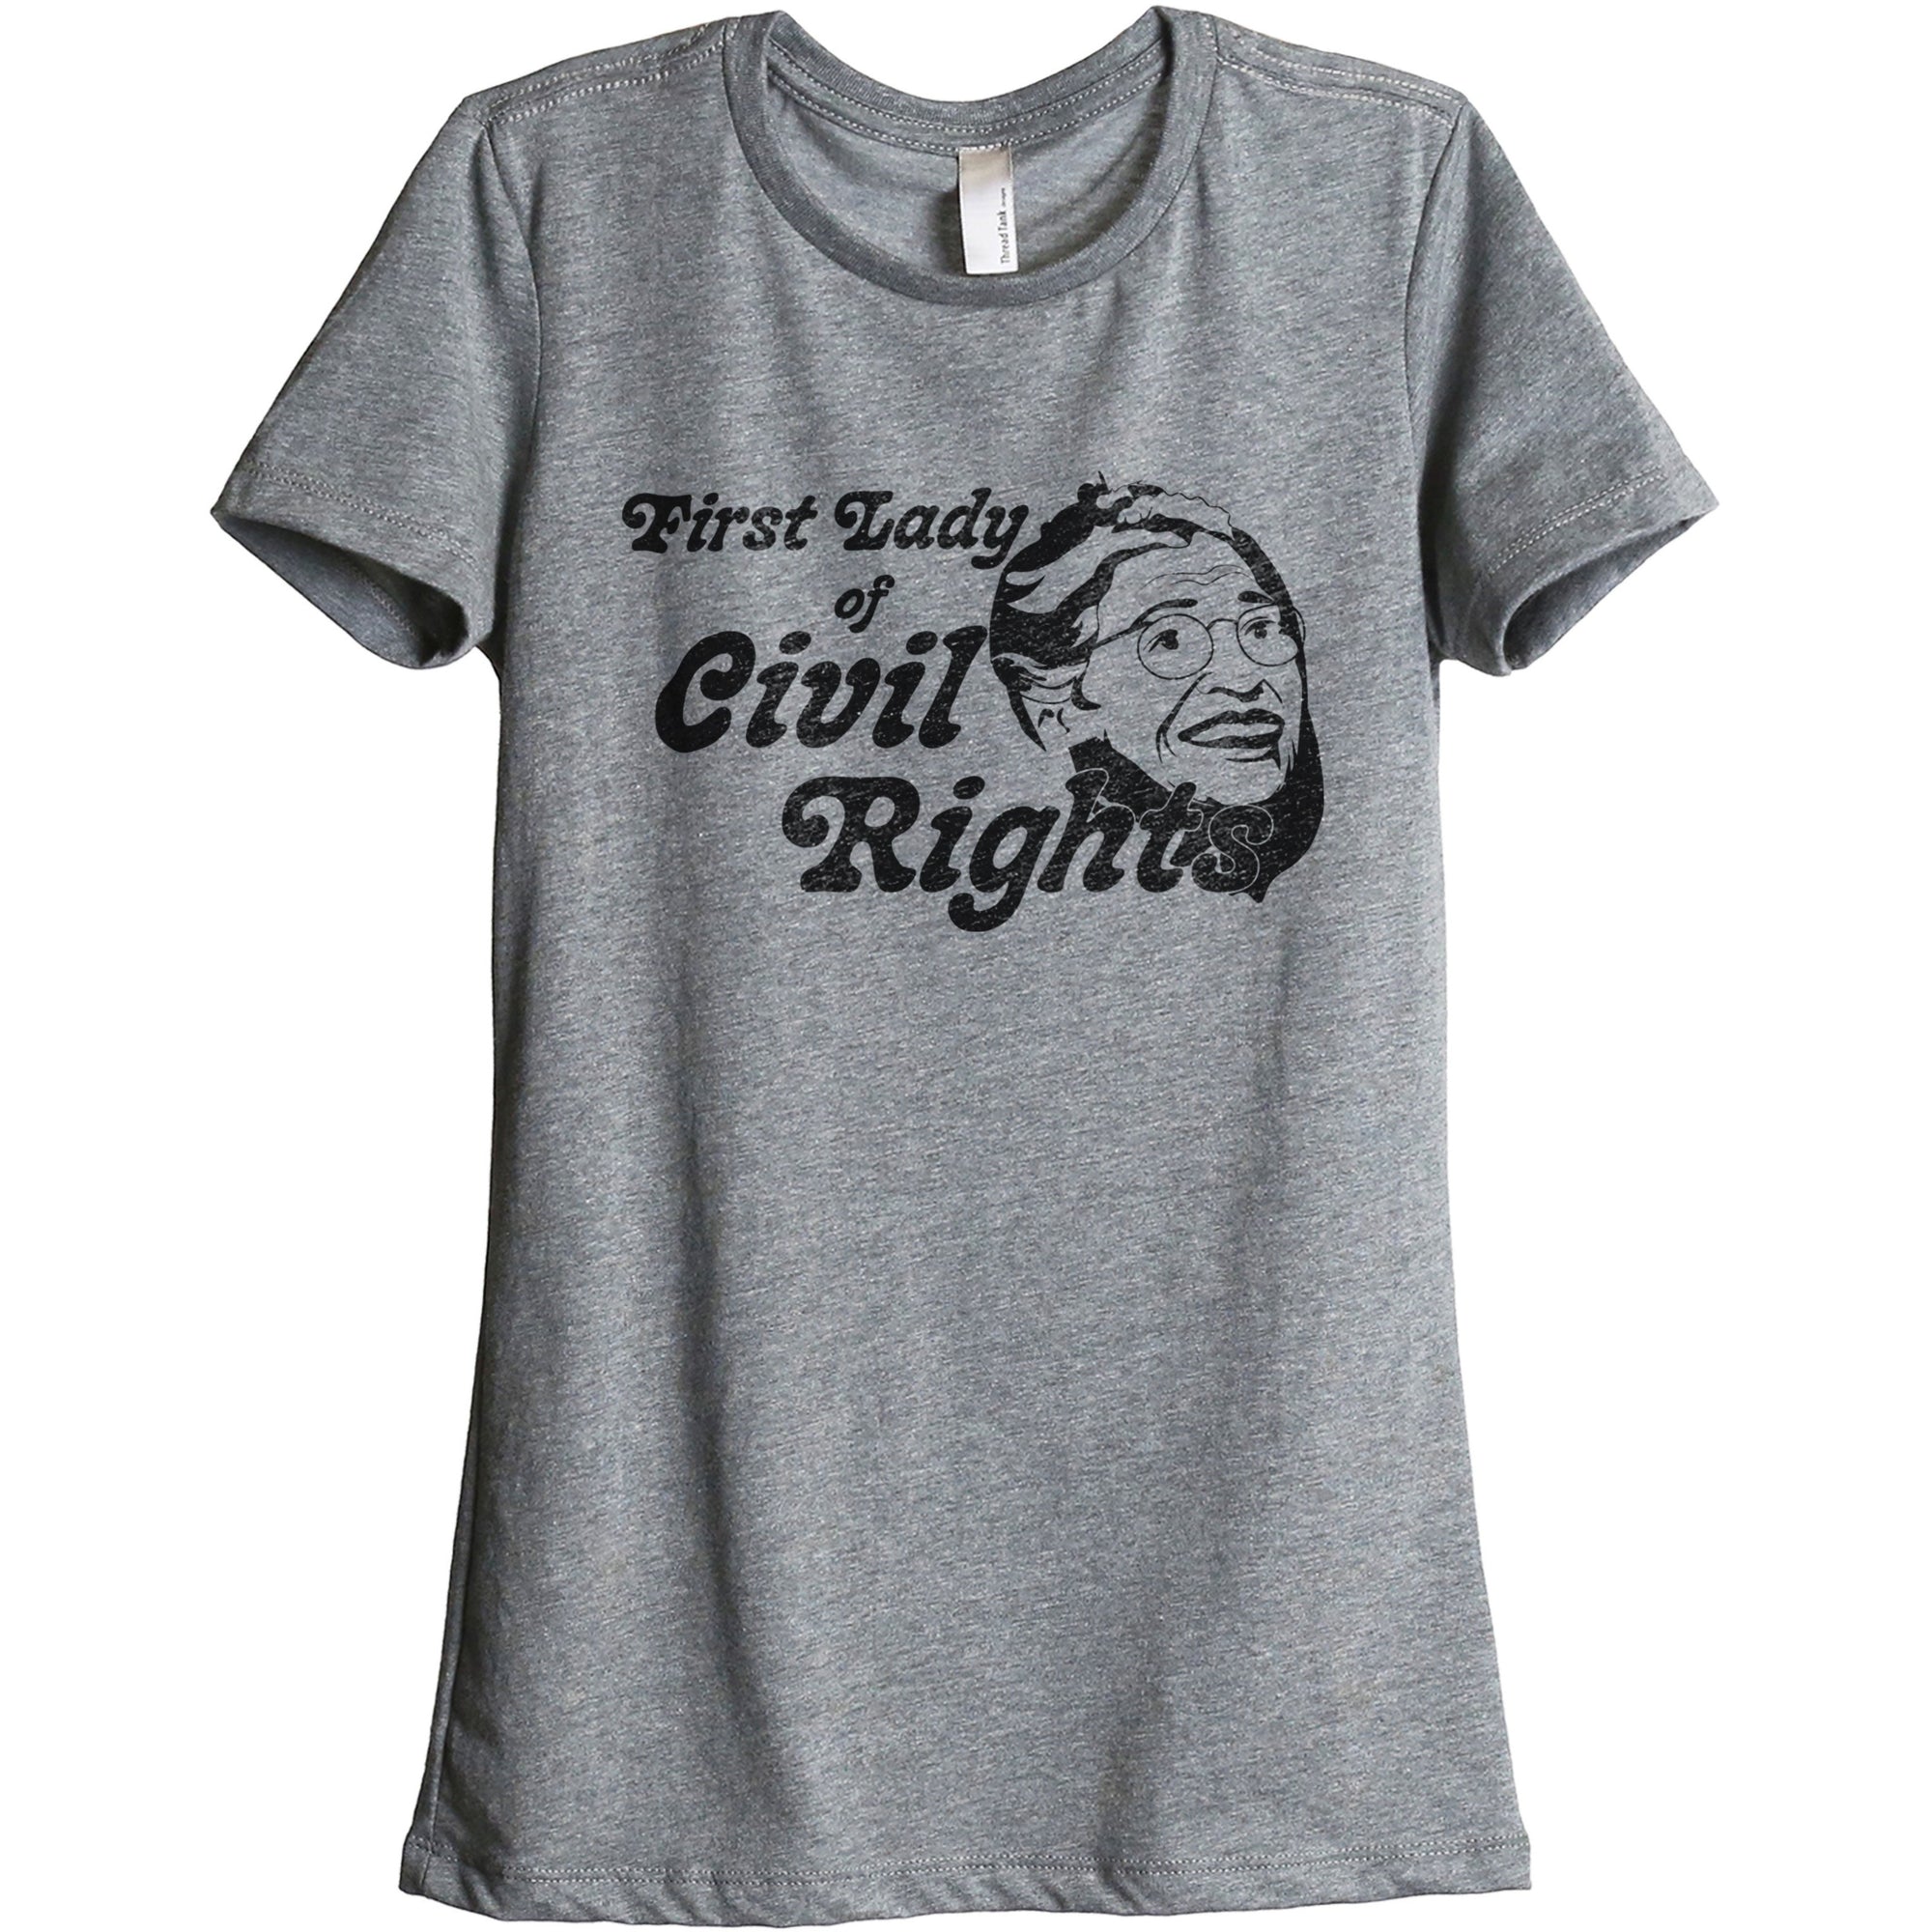 First Lady of Civil Rights - threadtank | stories you can wear